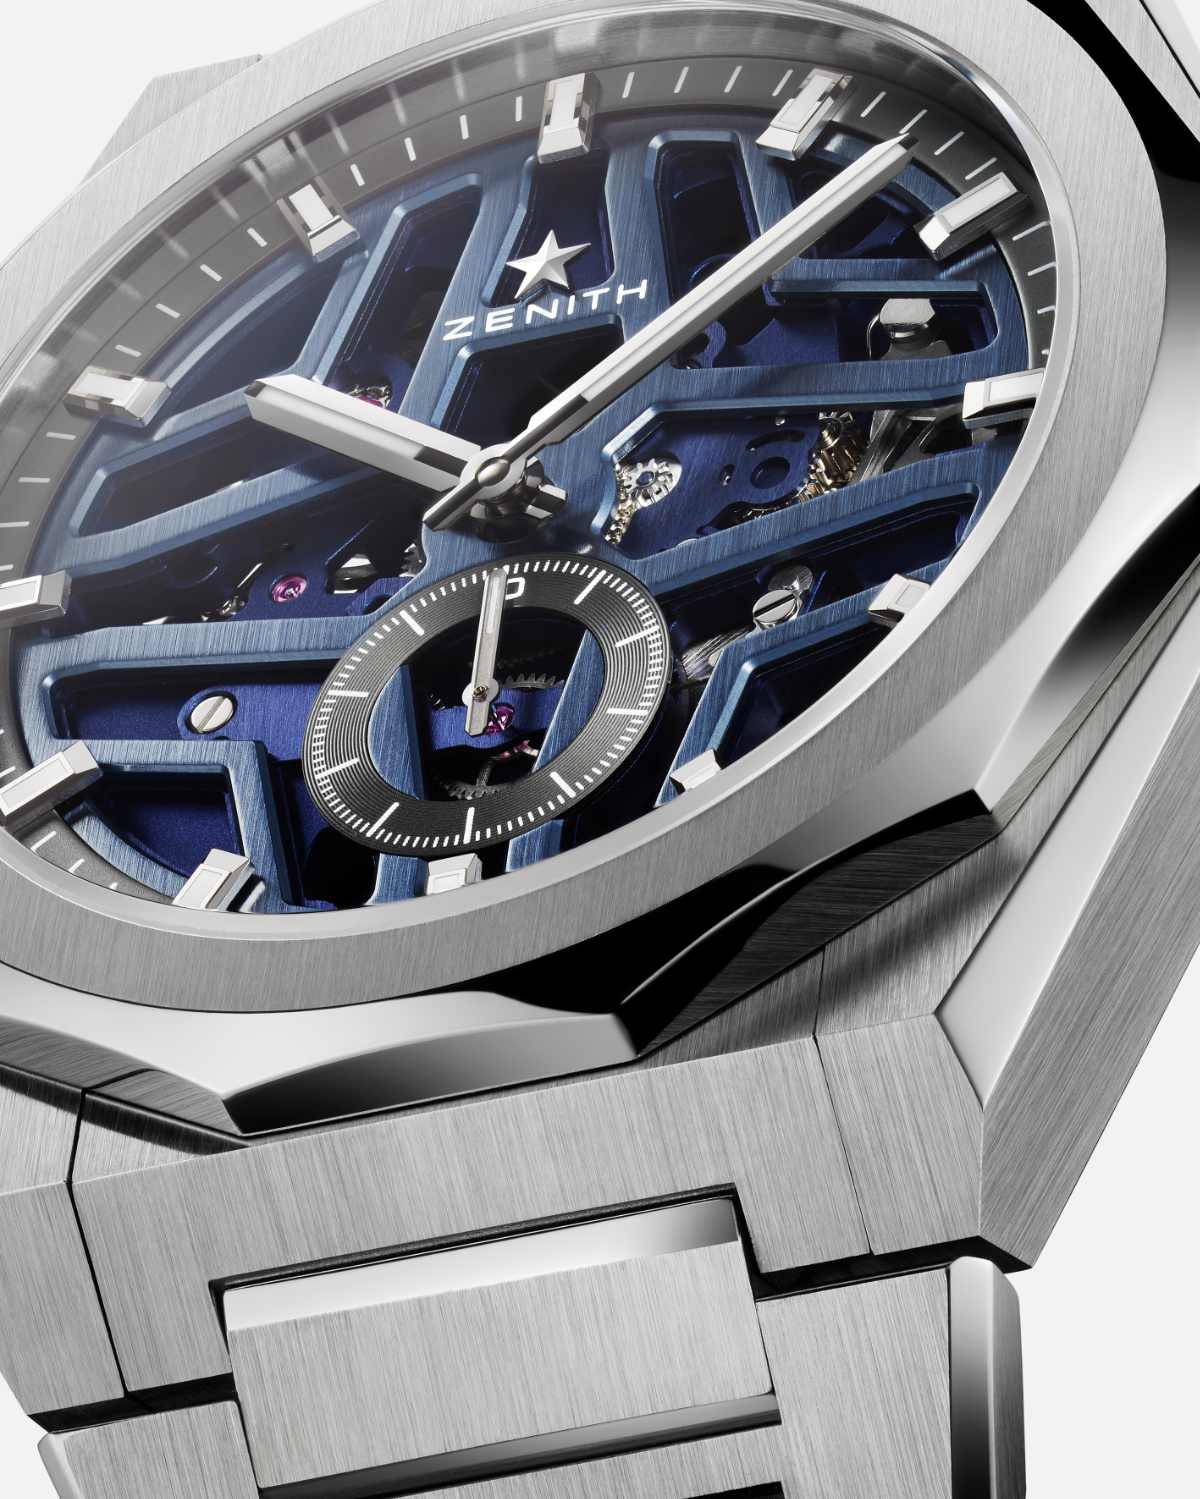 Zenith Unveiled The Defy Skyline Skeleton At LVMH Watch Week